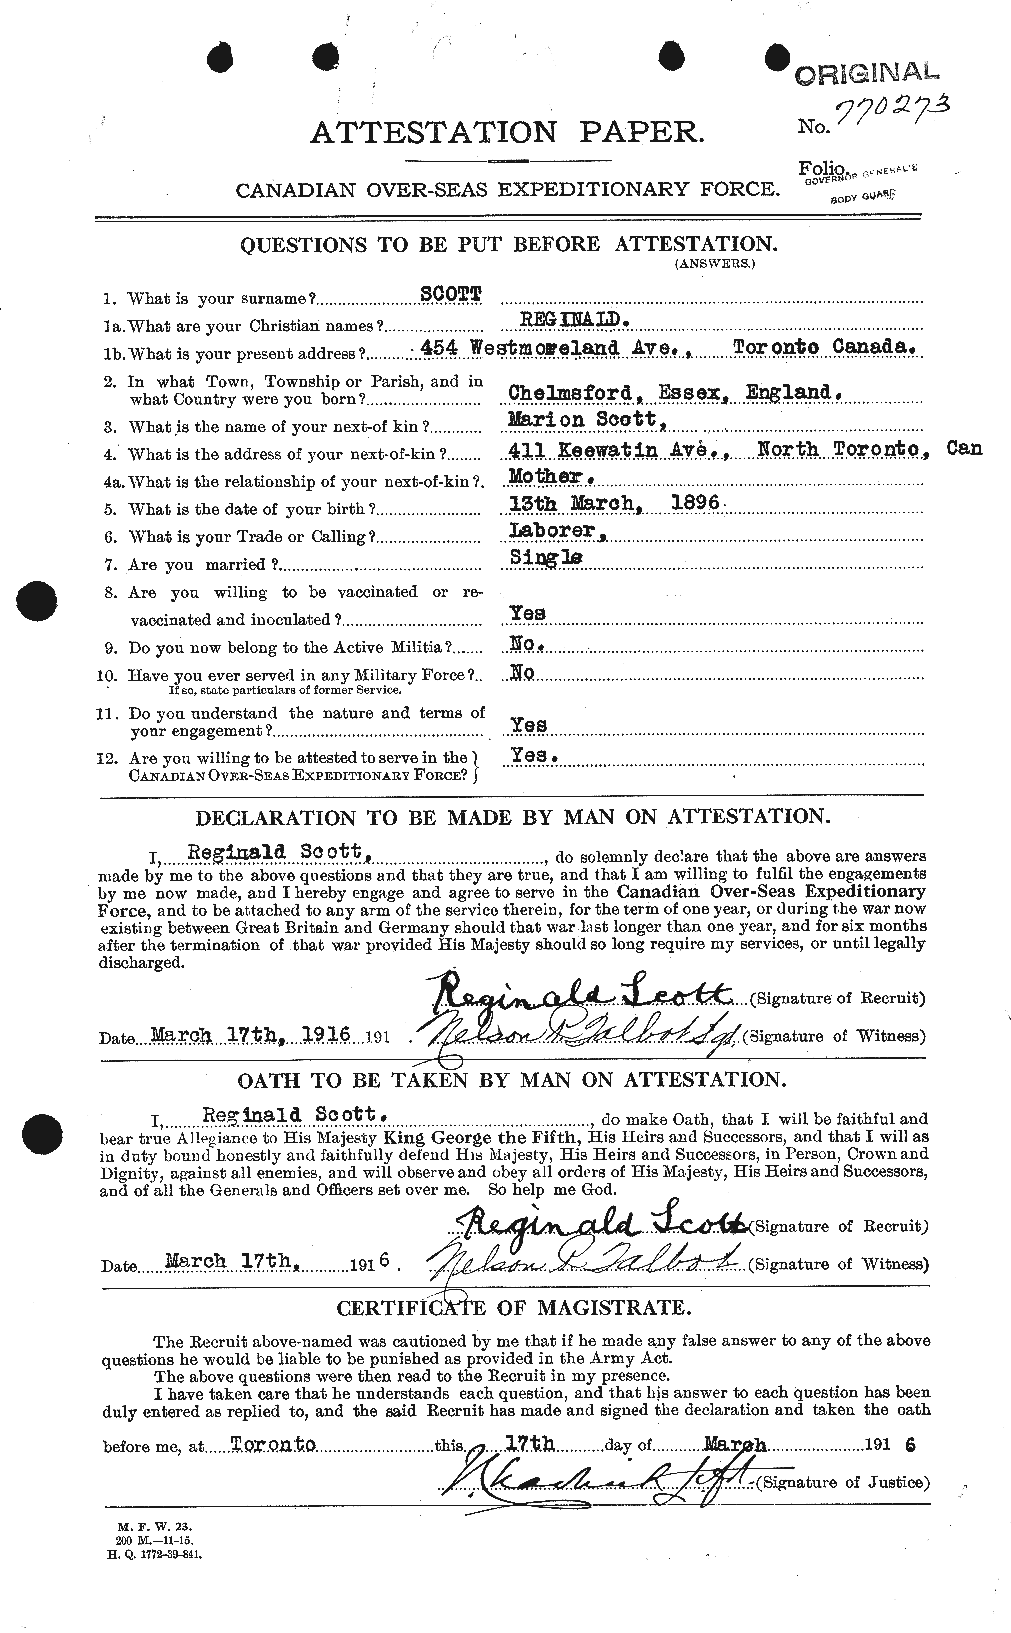 Personnel Records of the First World War - CEF 090202a